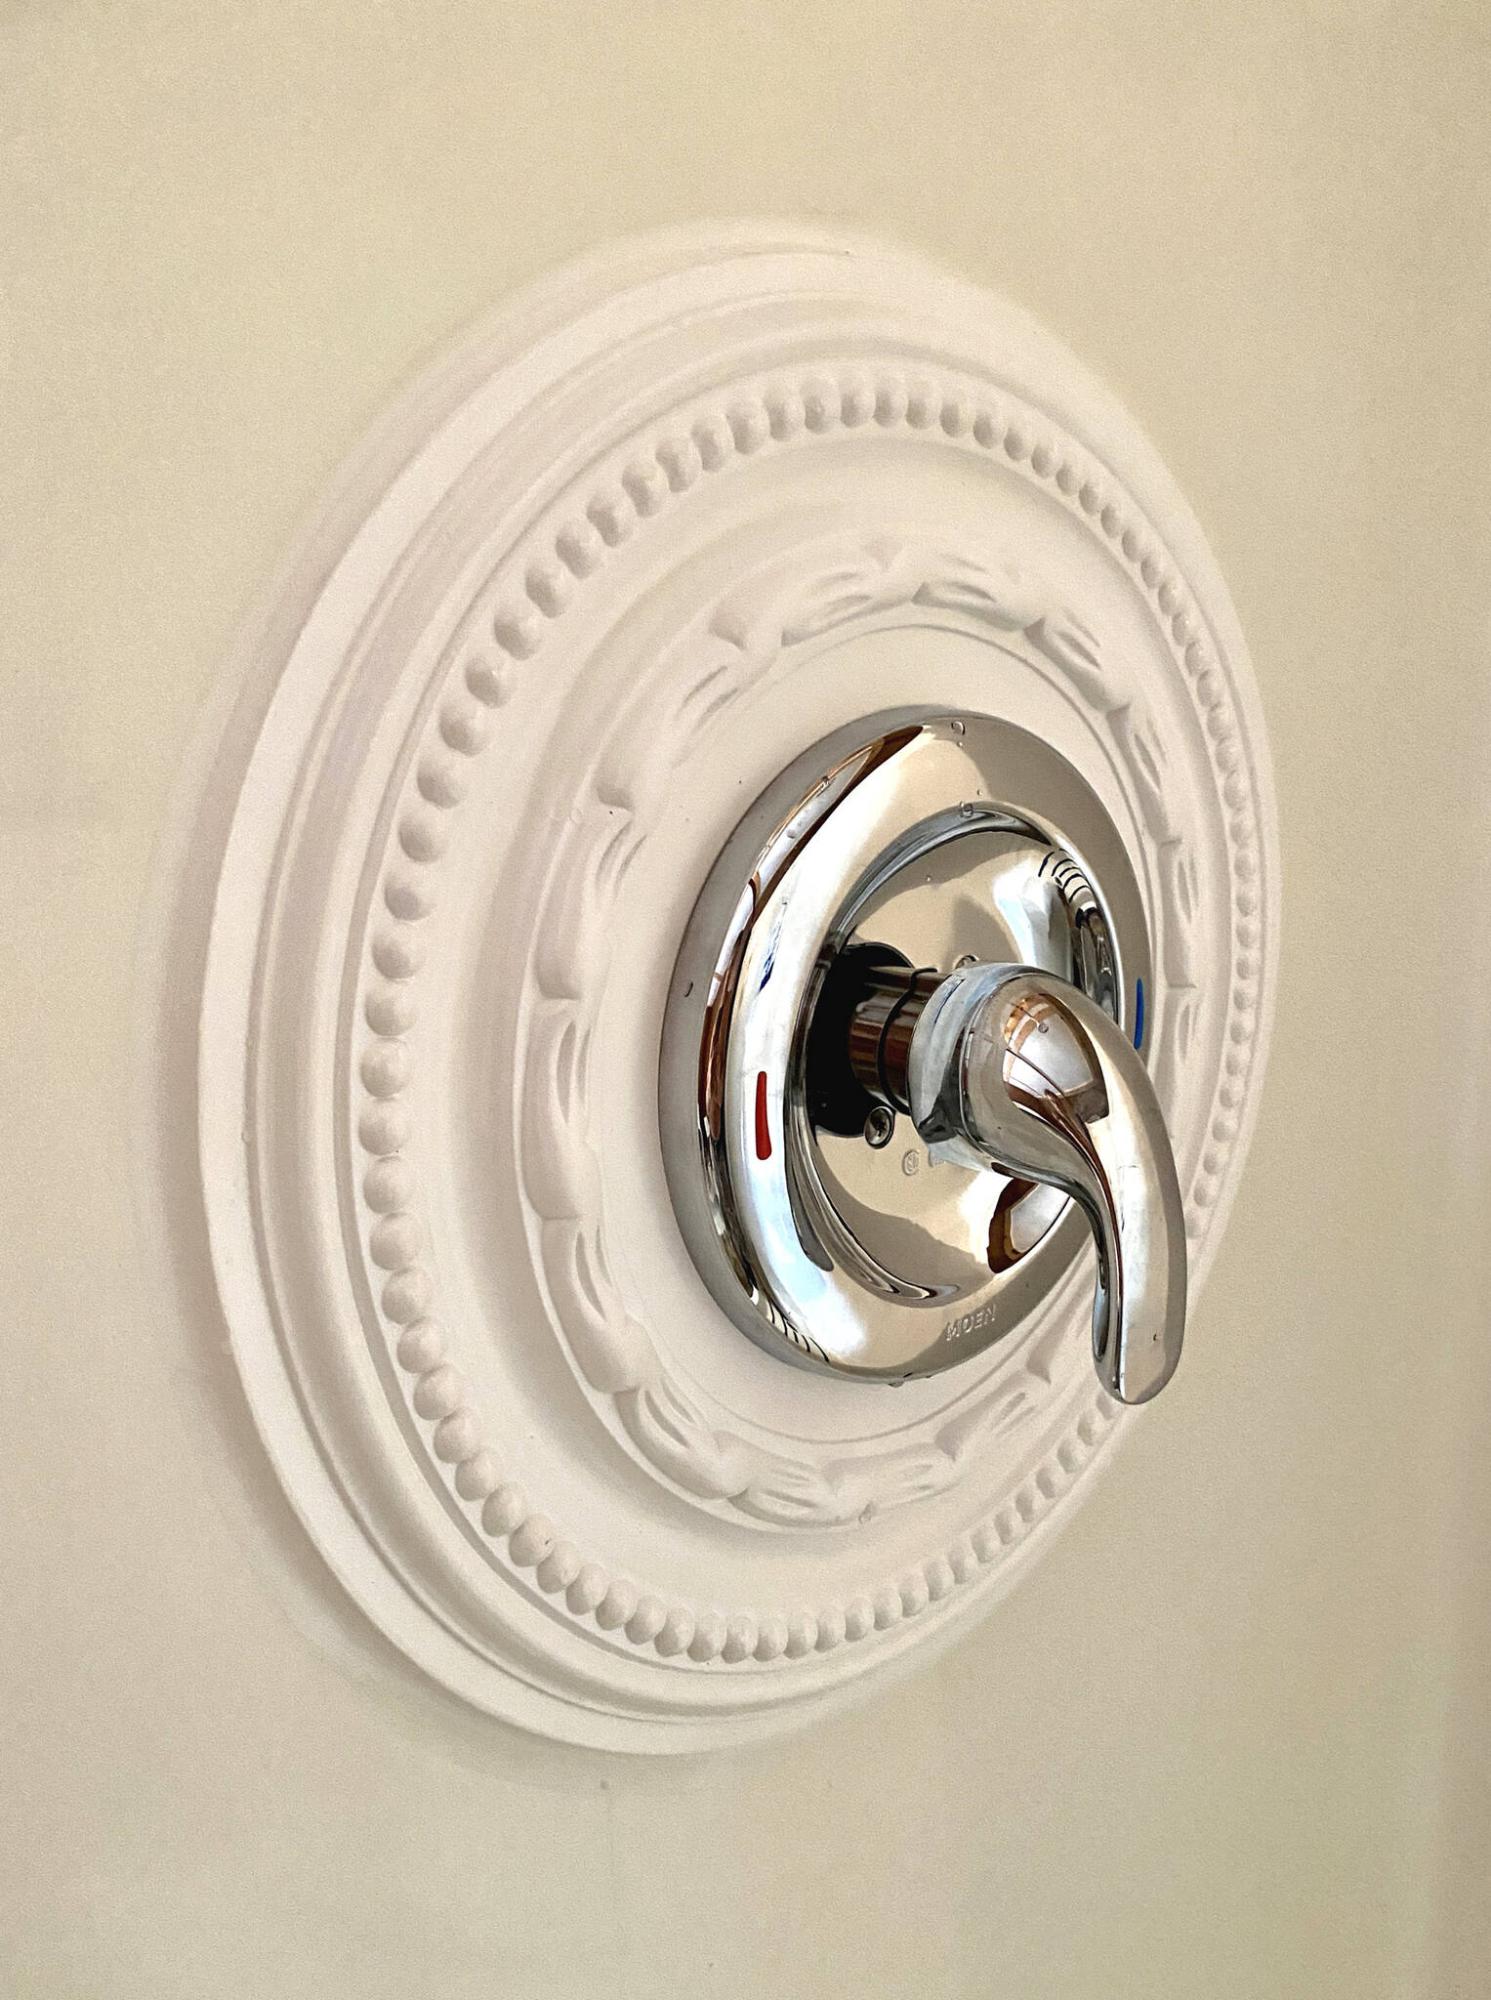  <p>Marc LaBossiere / Winnipeg Free Press</p>
                                <p>The unconventional use of a ceiling medallion elegantly hides unsightly holes from prior shower faucet fixes of a shower stall.</p> 